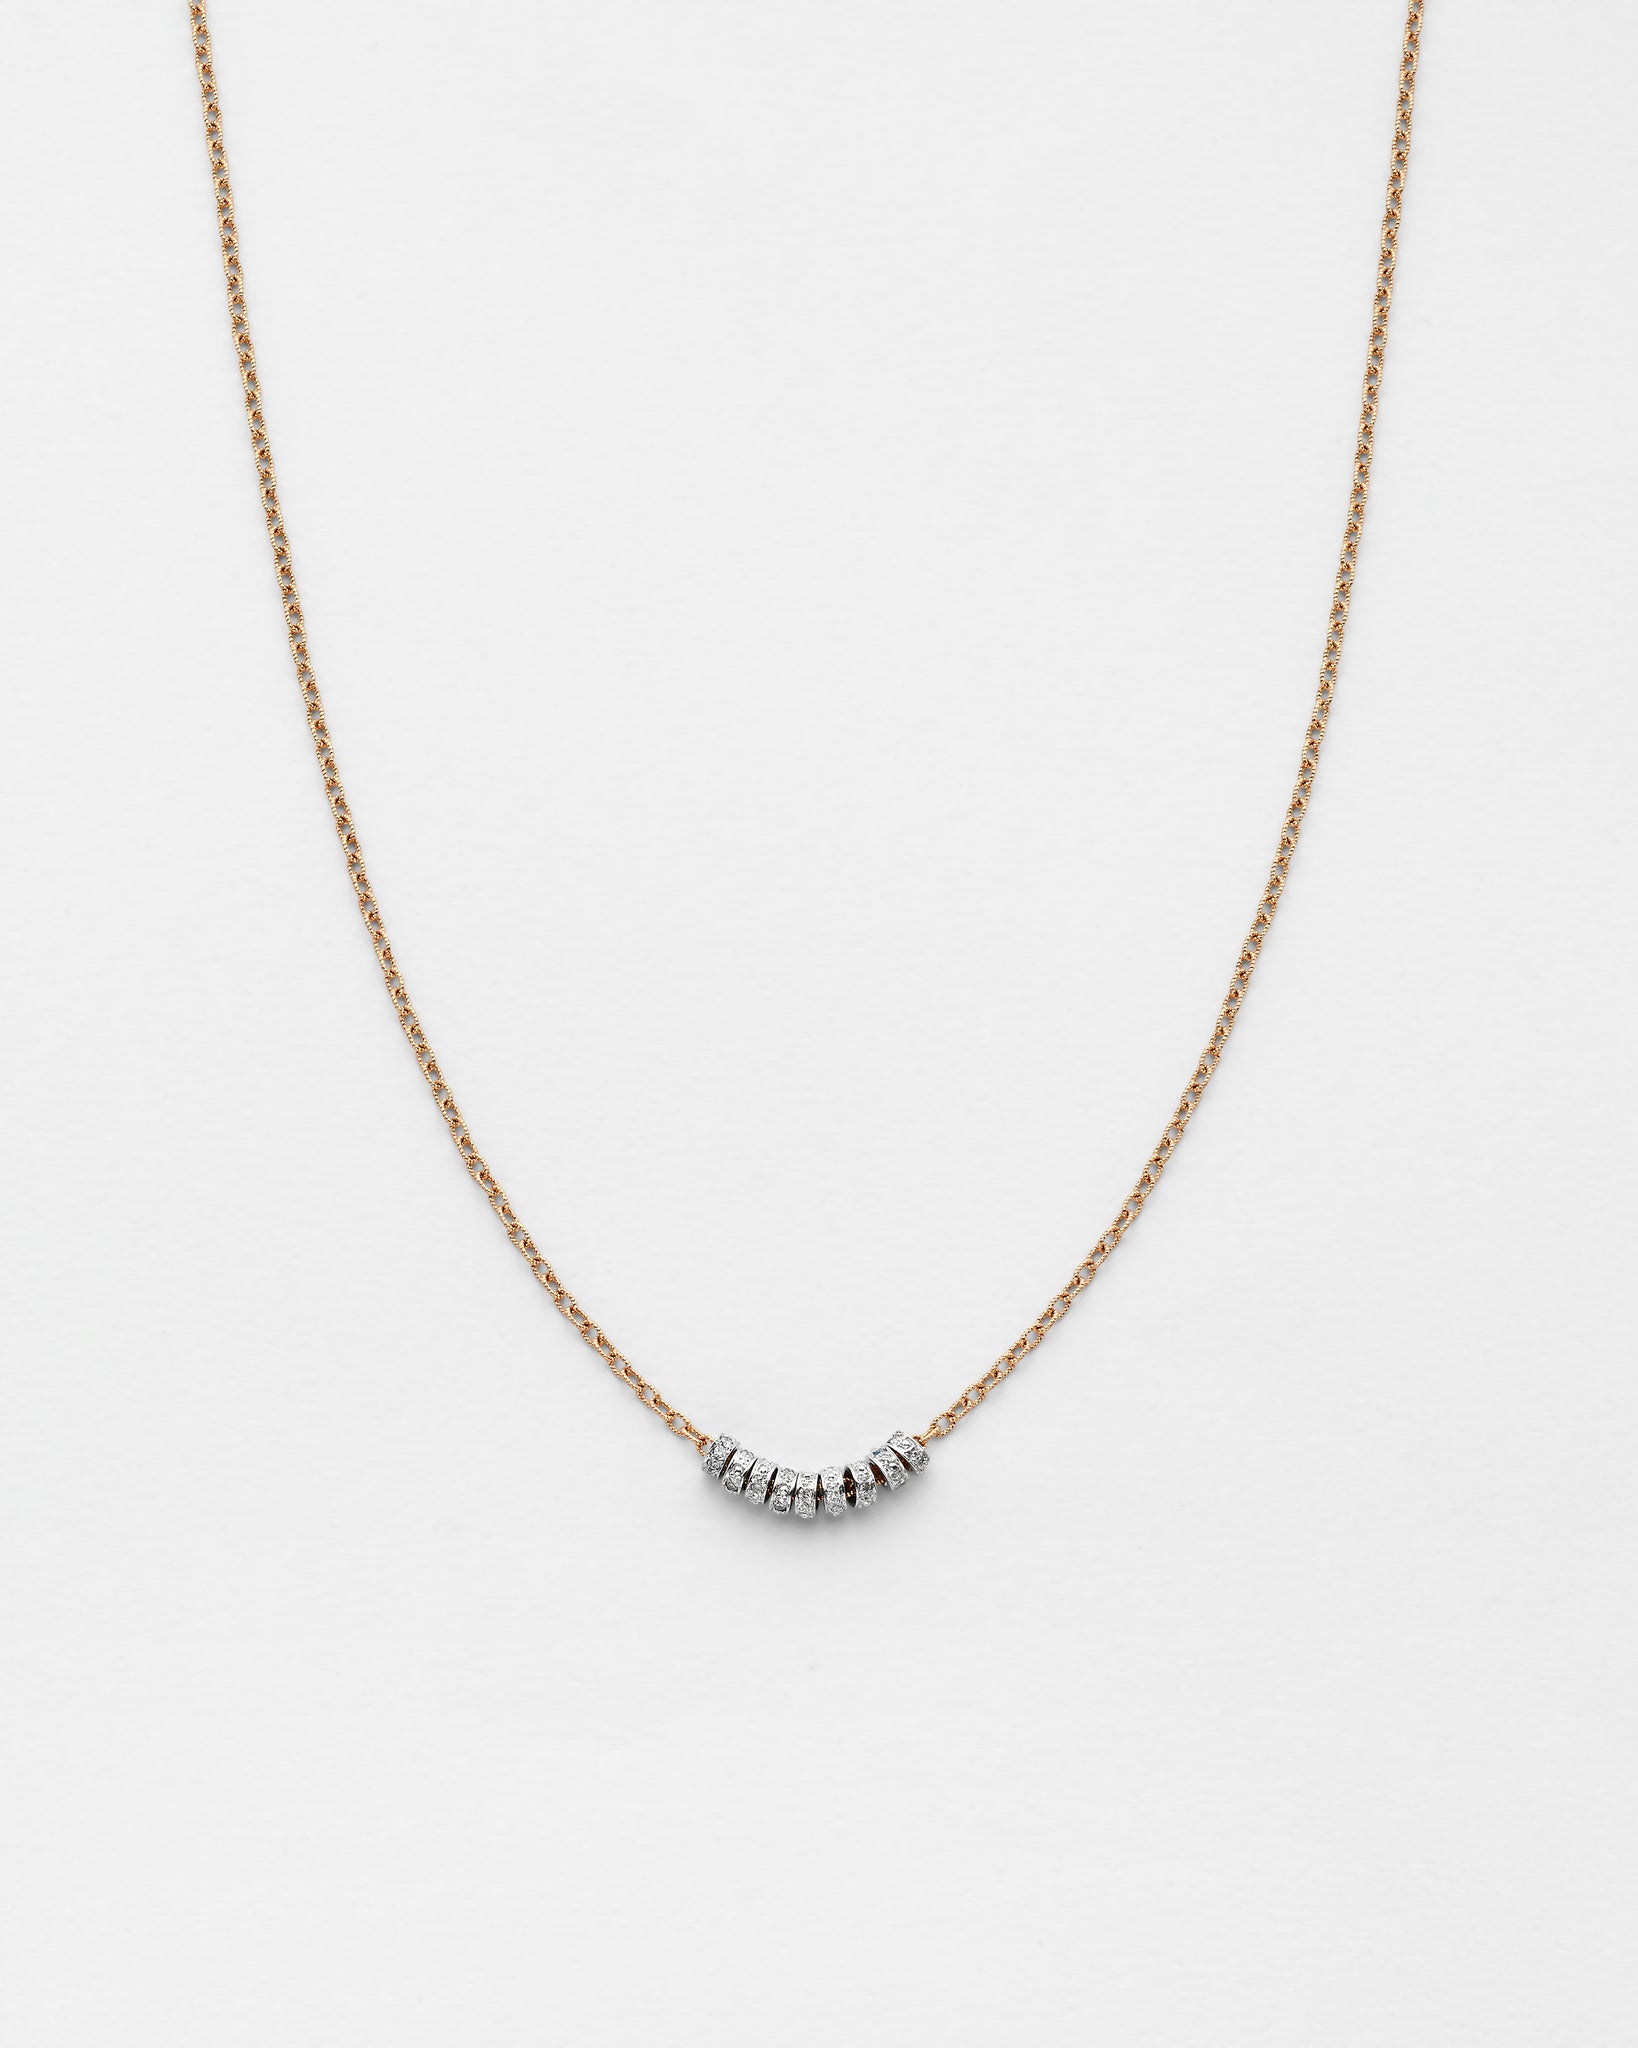 Chain Reaction Rondel Necklace